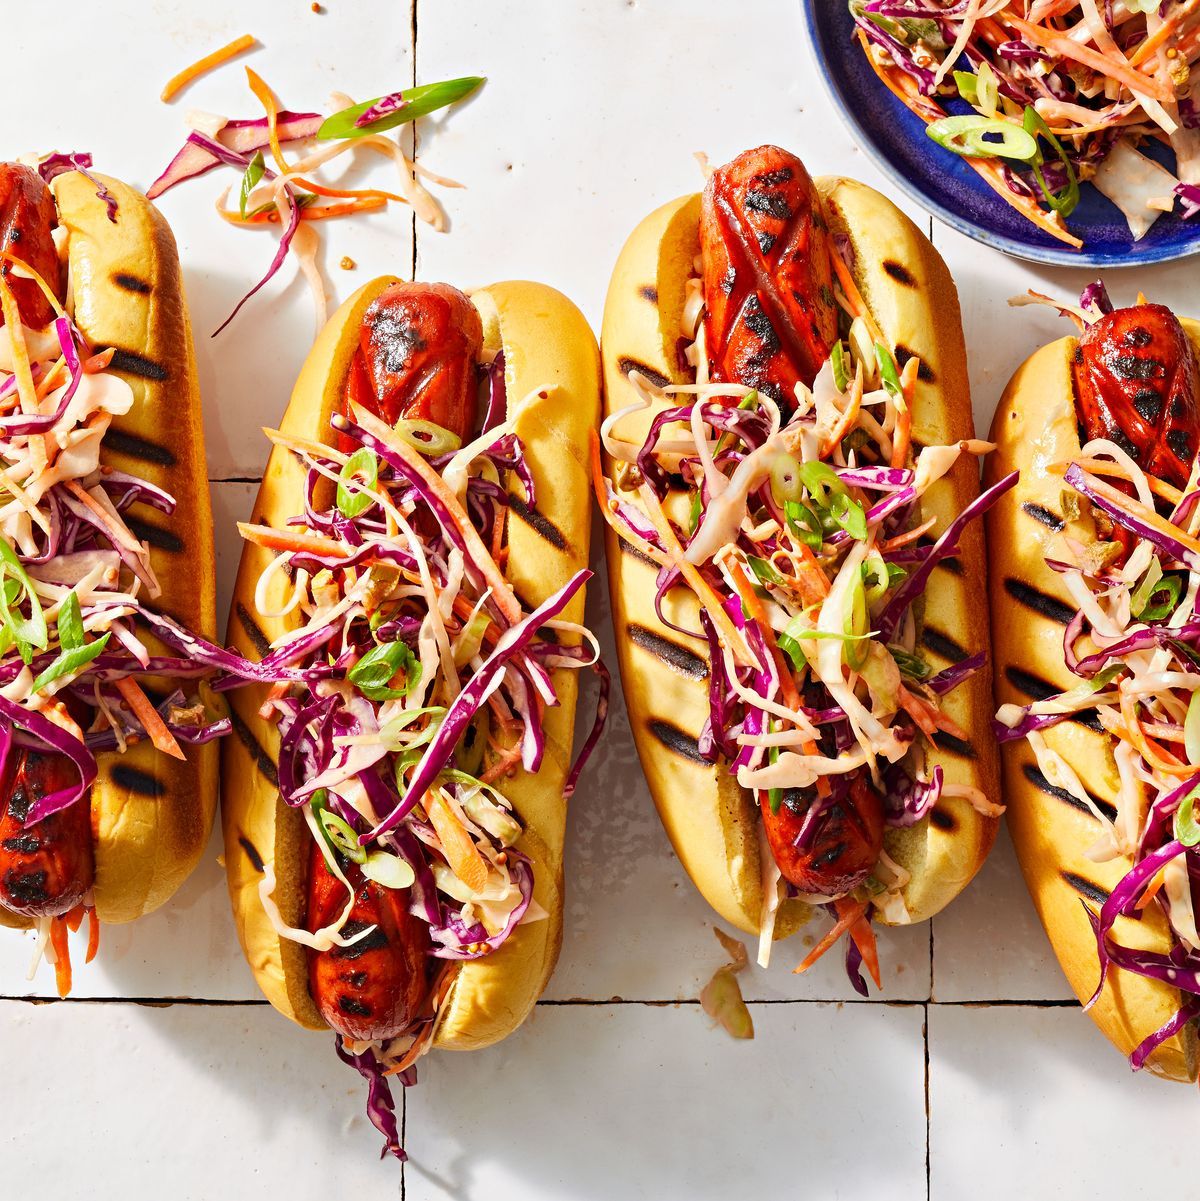 Hot Dogs and Sausages for a Tasty Tailgate or Backyard BBQ